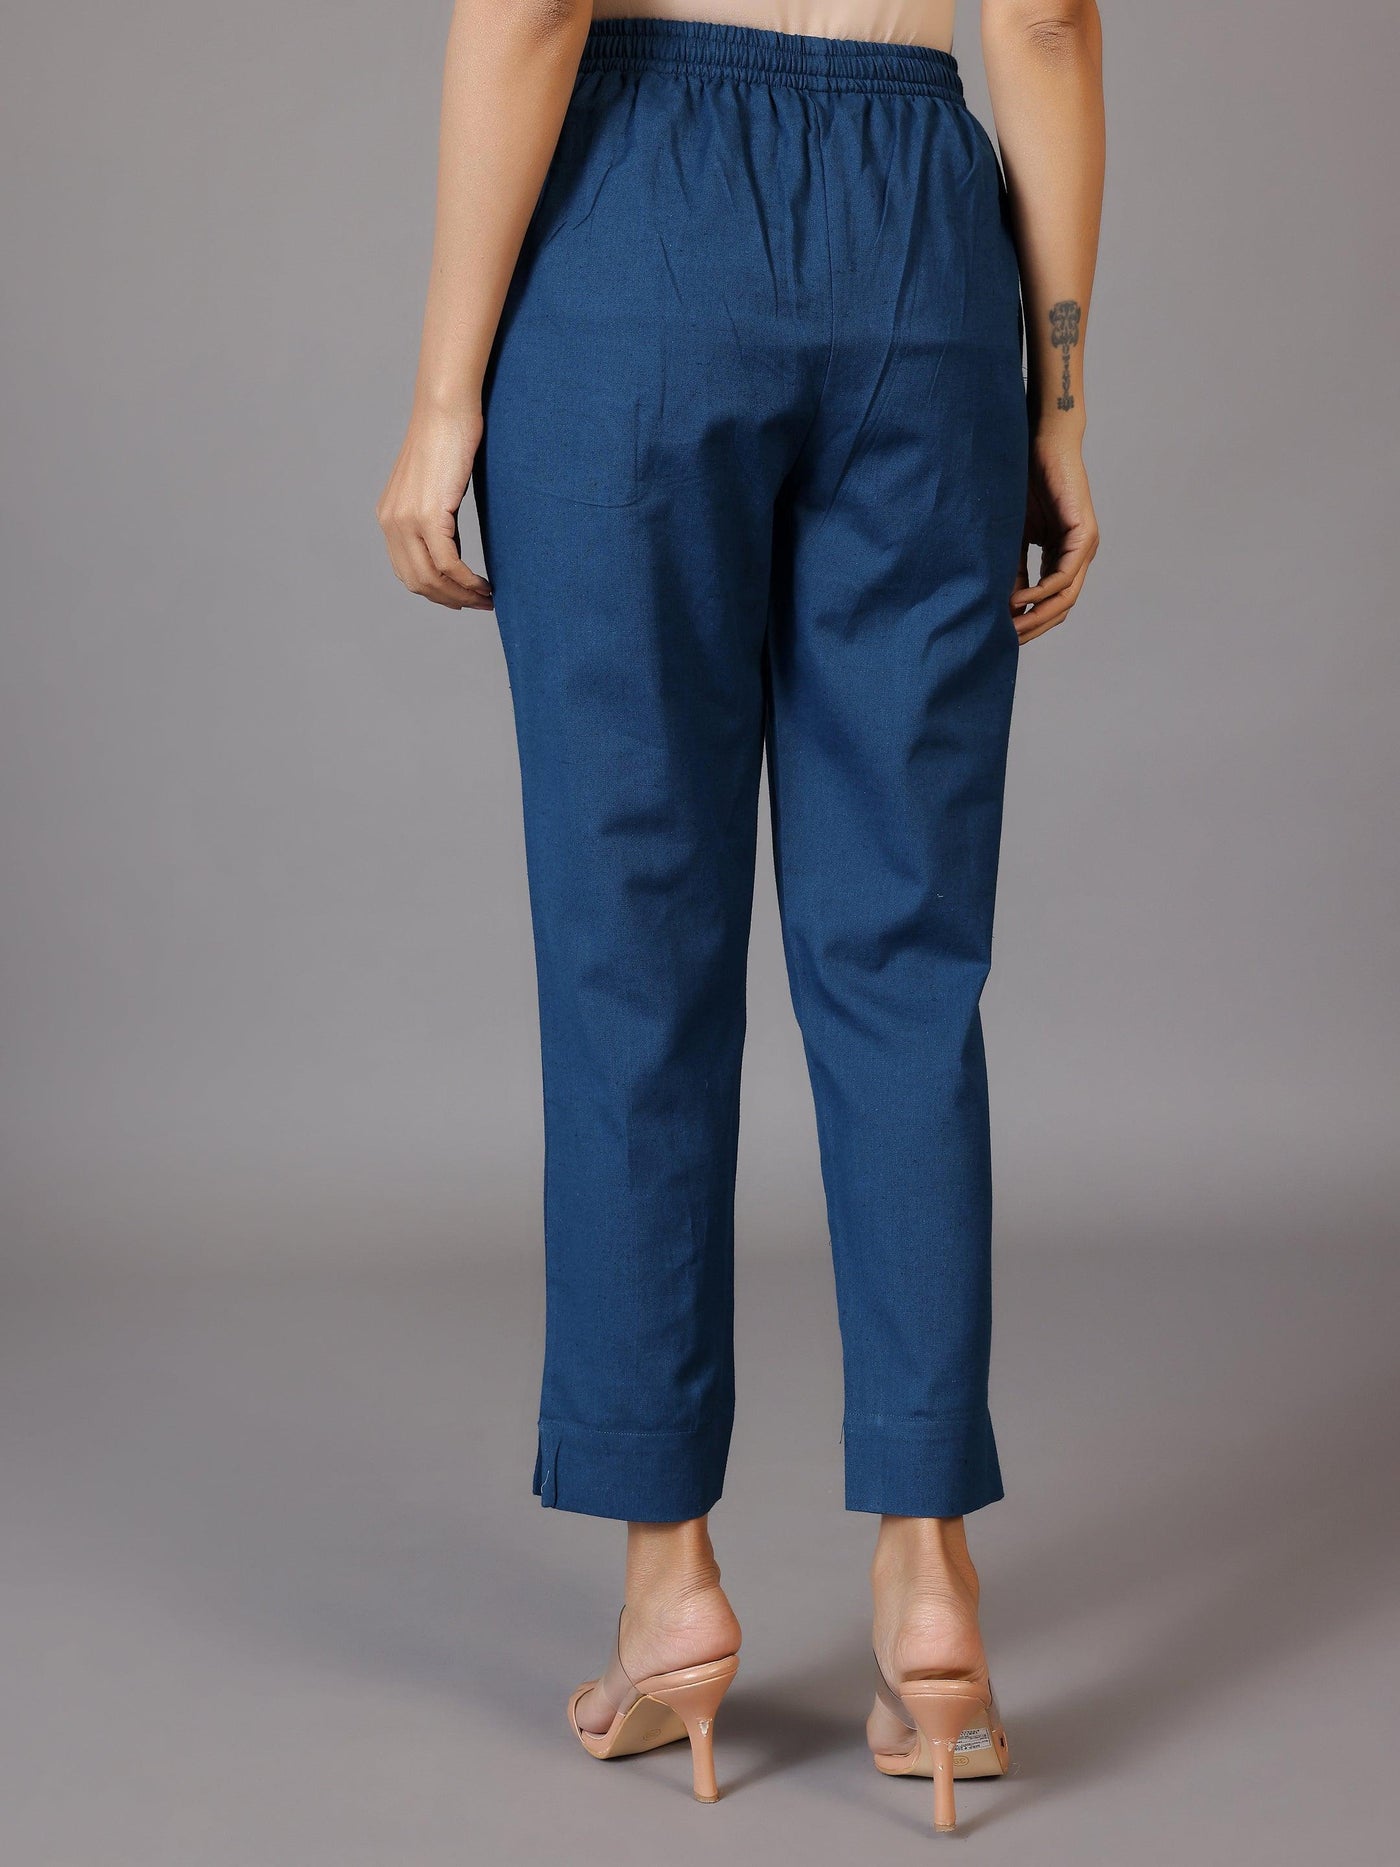 Teal Solid Cotton Trousers - Libas